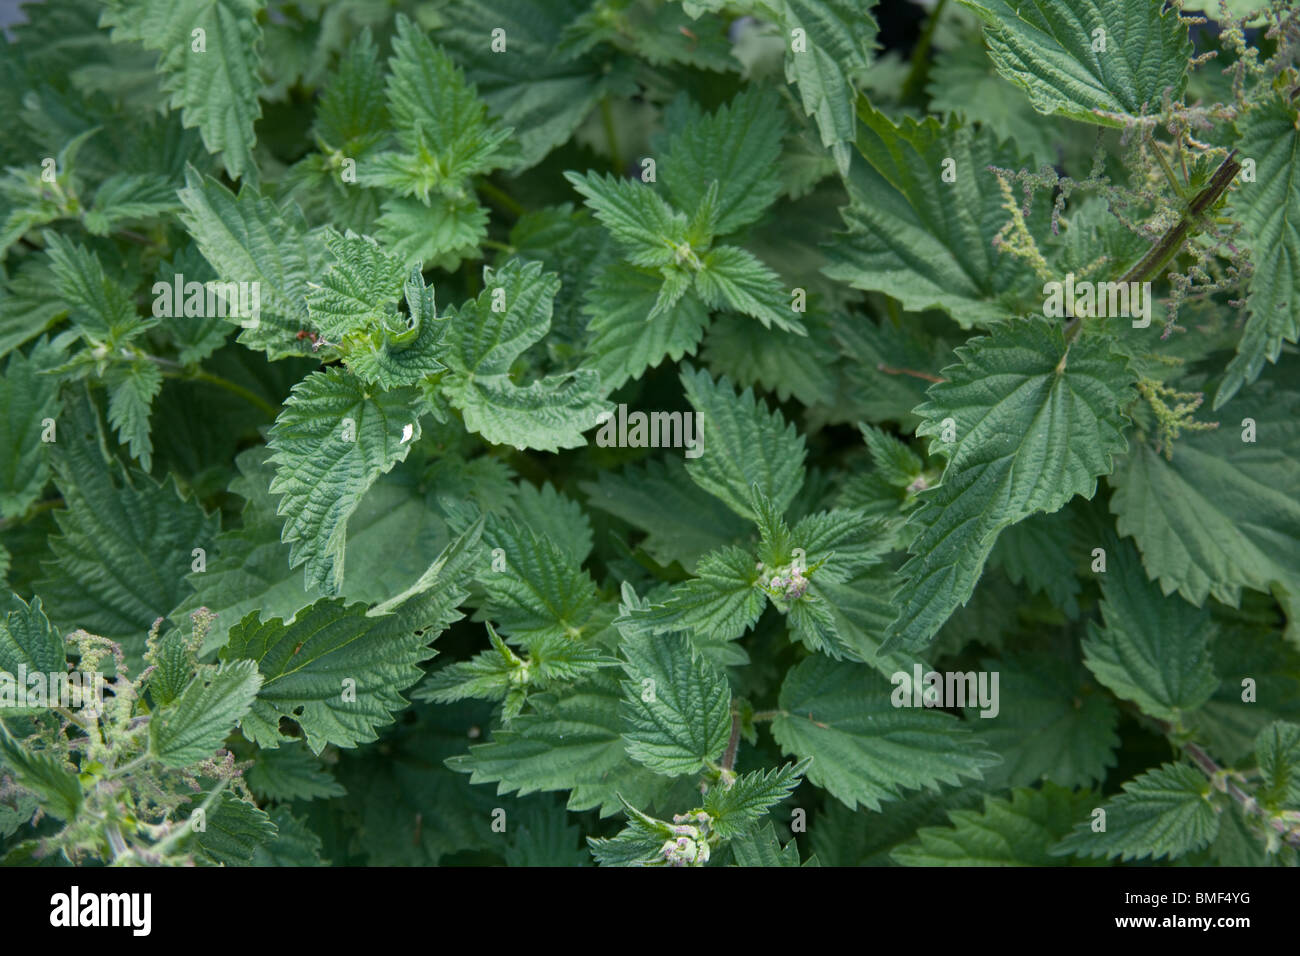 Common nettle or stinging nettle, Urtica dioica. Hampshire, England. Stock Photo